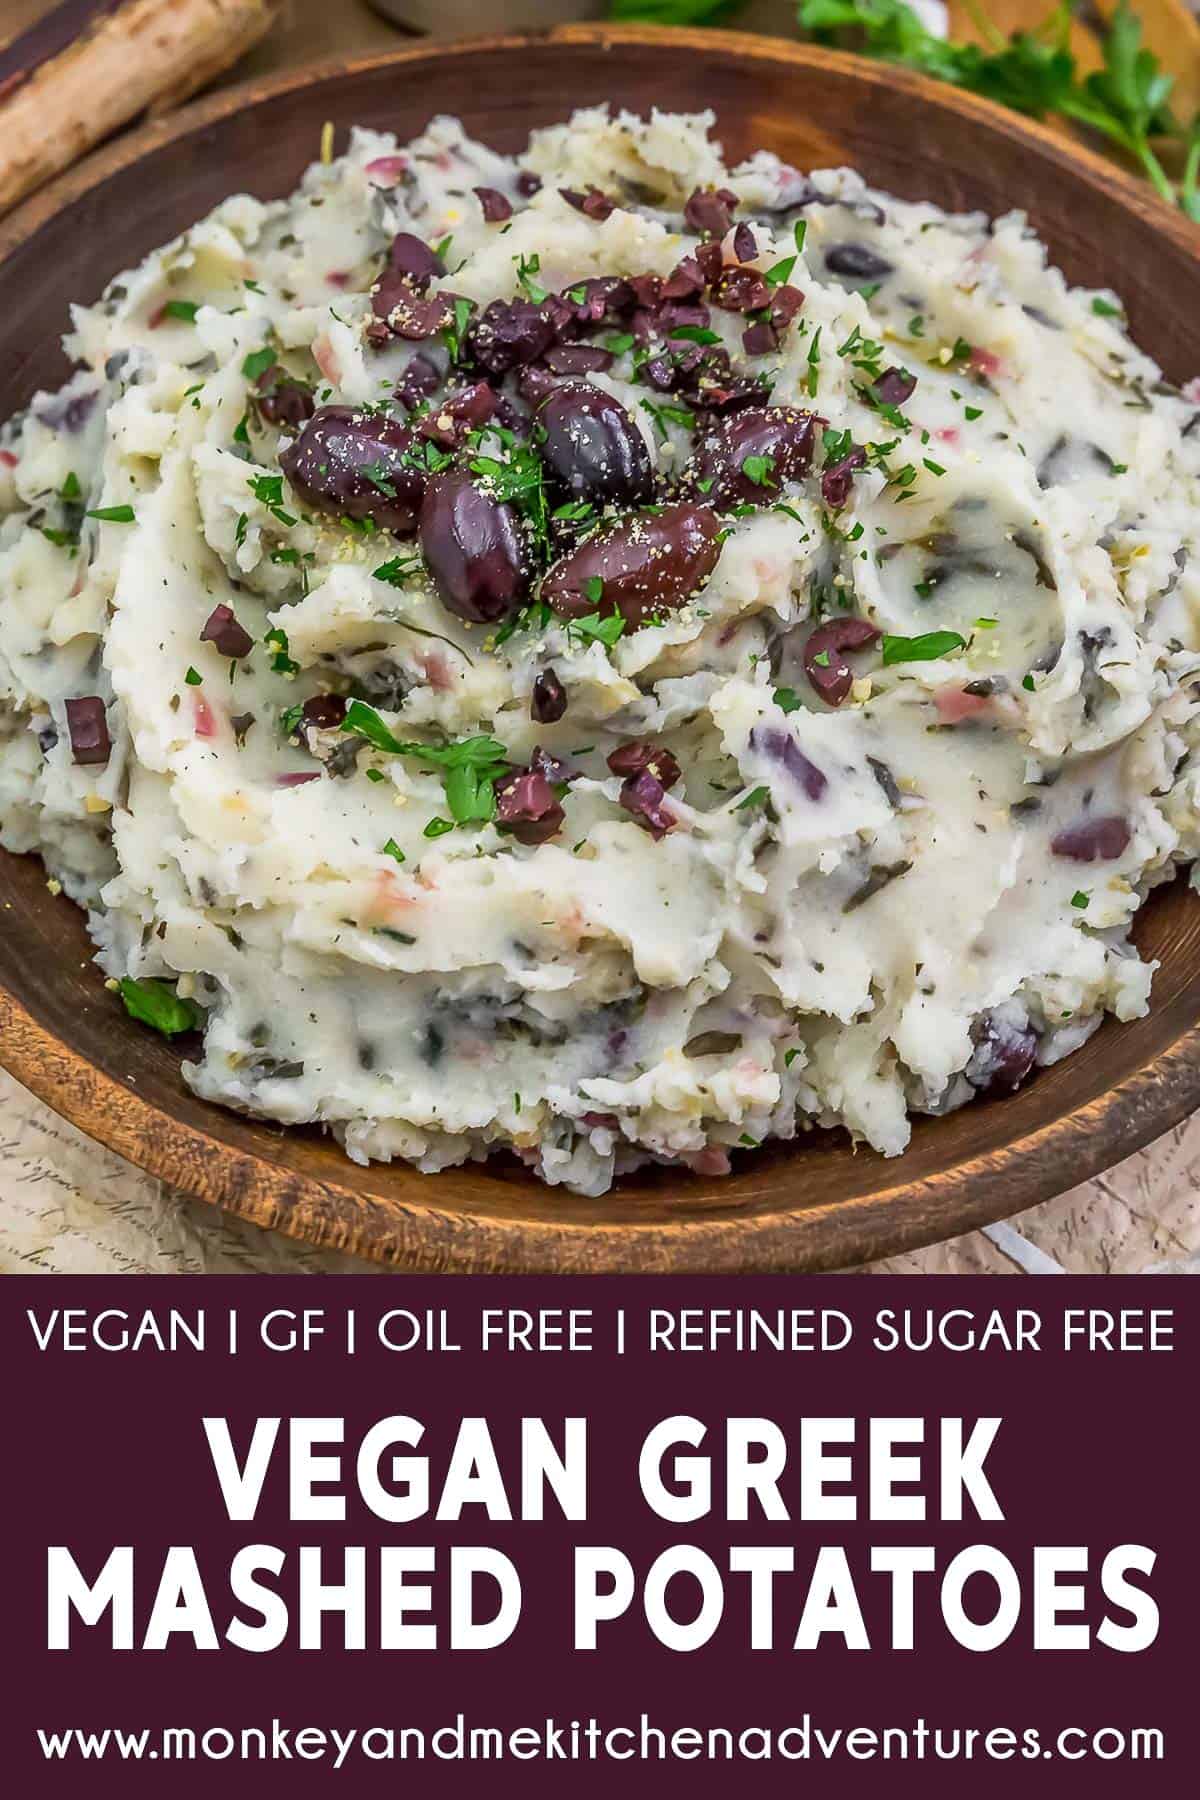 Vegan Greek Spinach Mashed Potatoes with text description